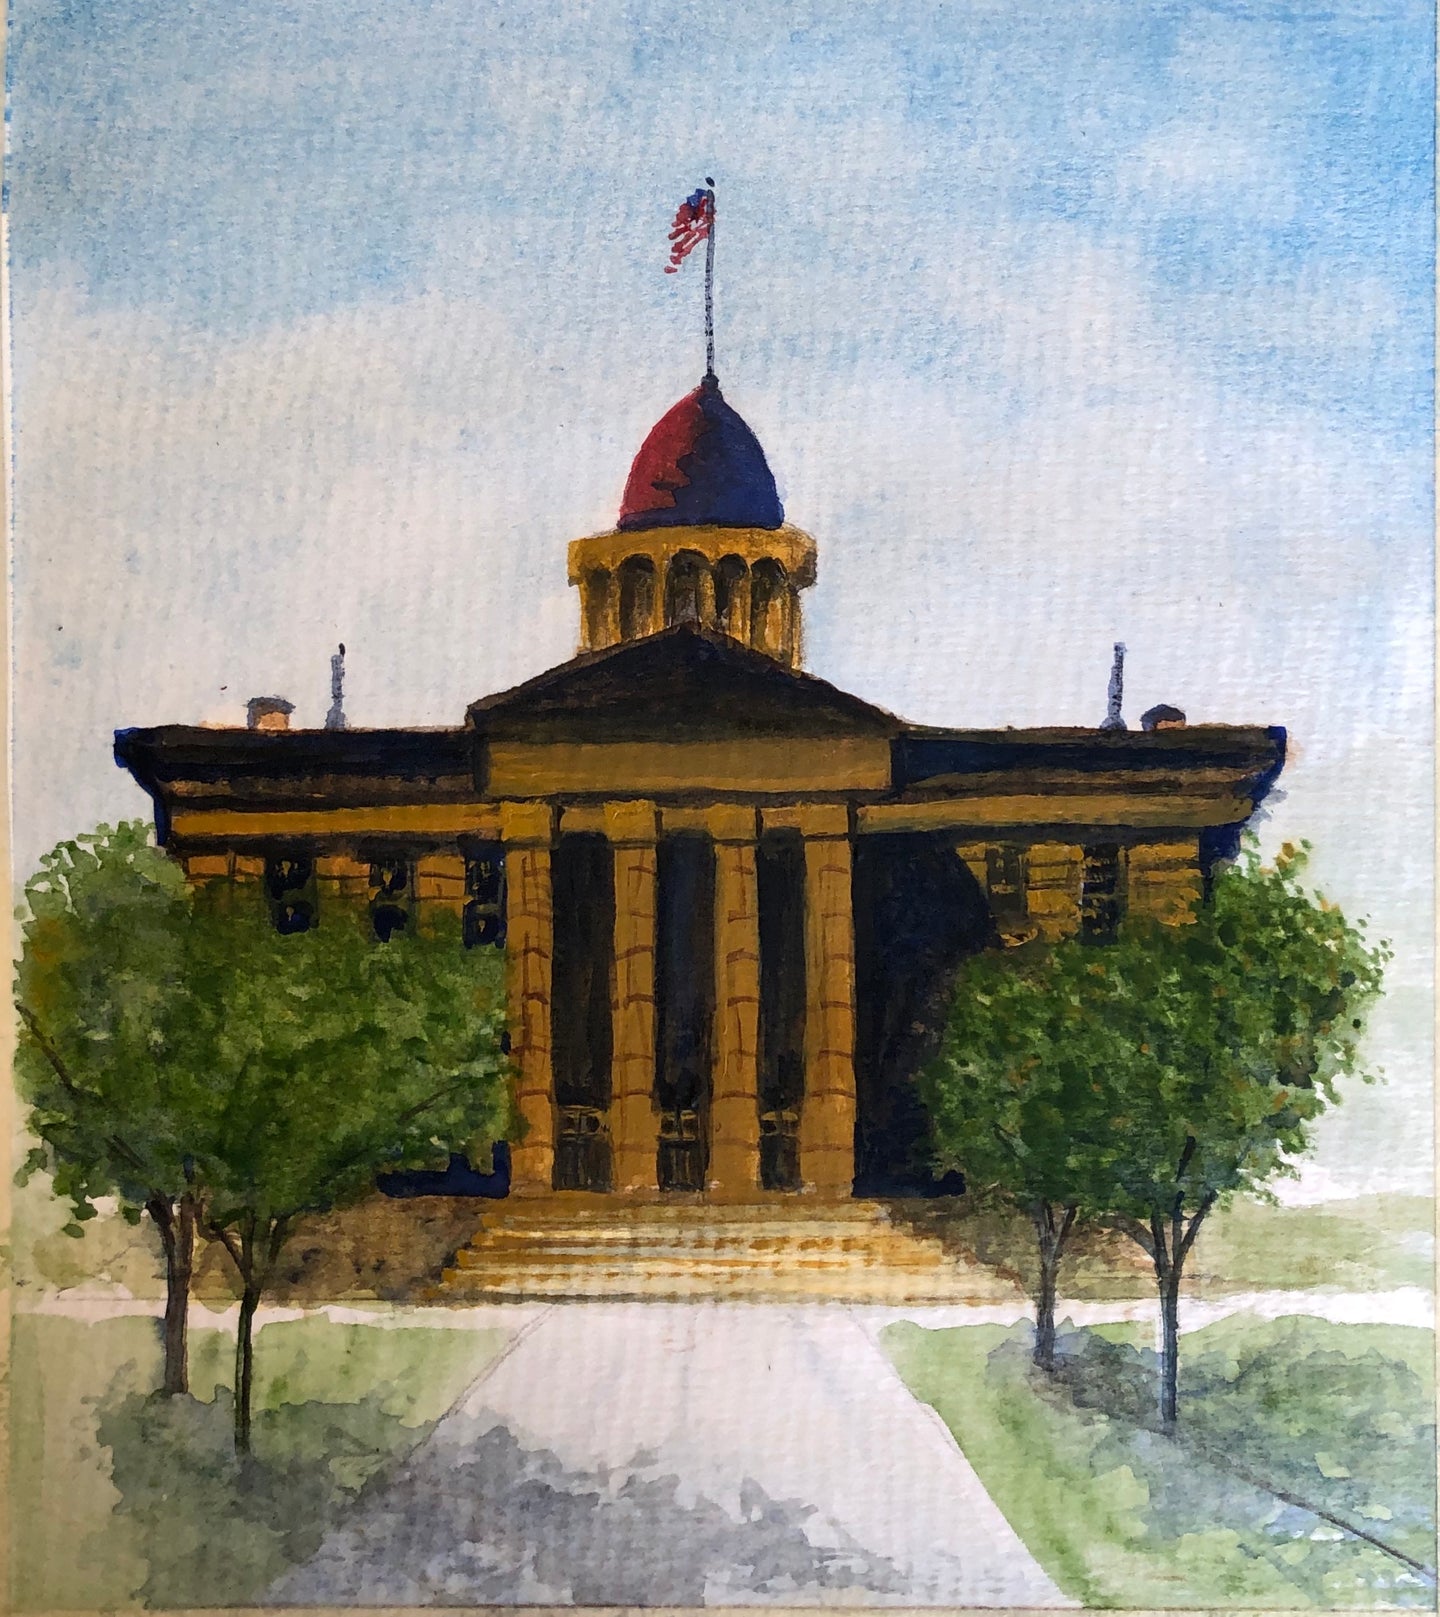 Old State Capitol